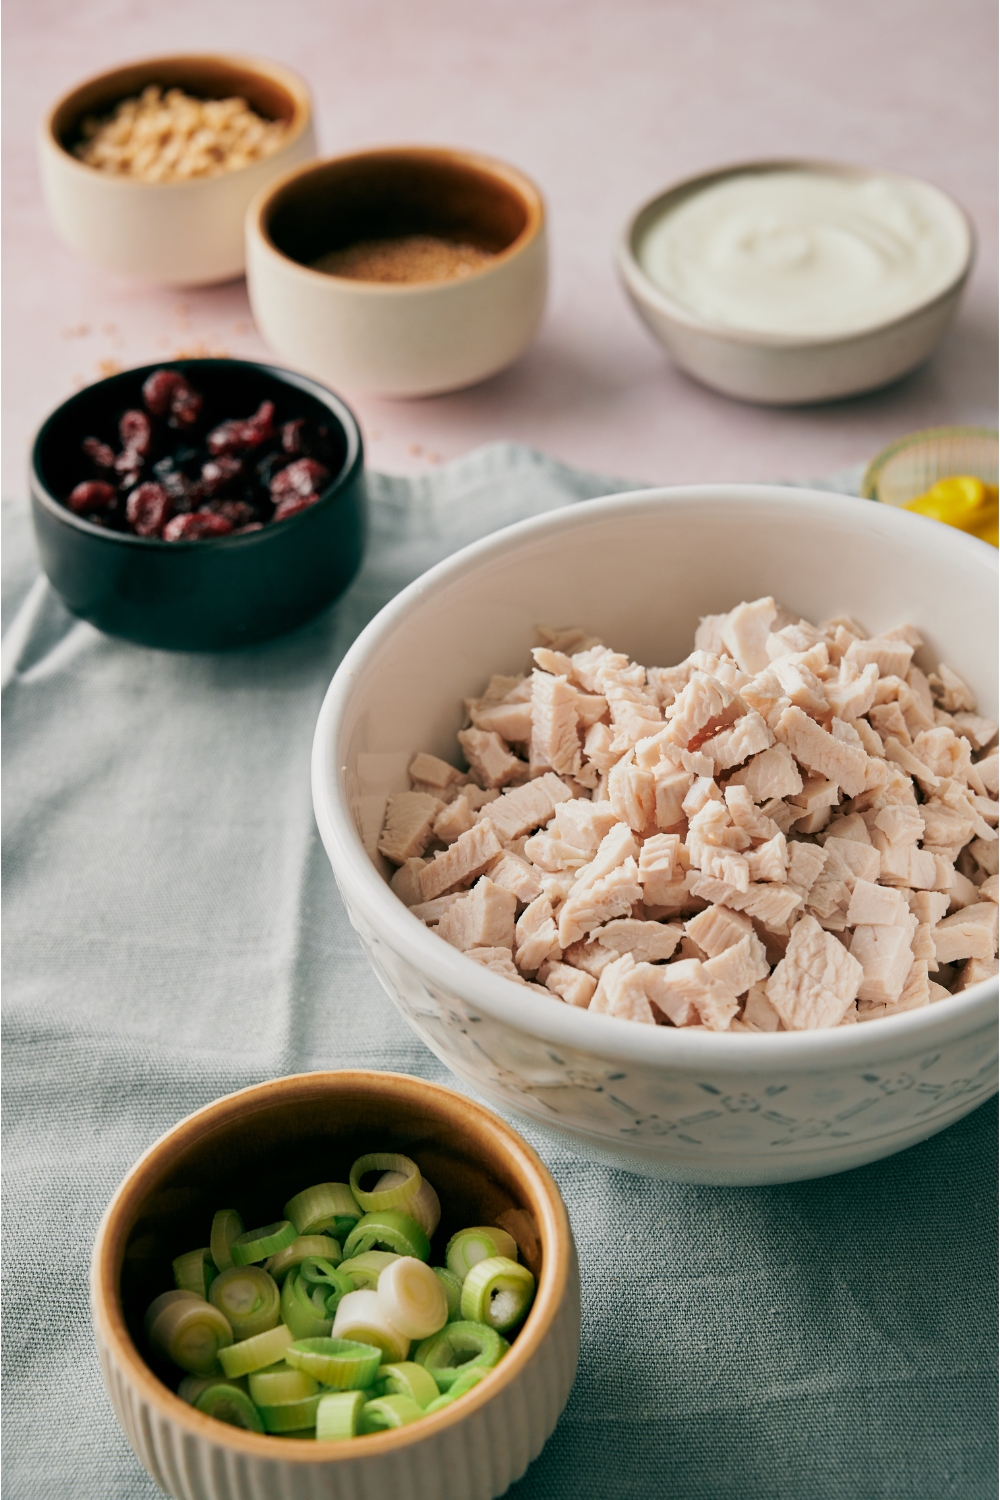 A bowl of diced chicken next to smaller bowls of green onions, dried cranberries, mayonnaise, and pine nuts.